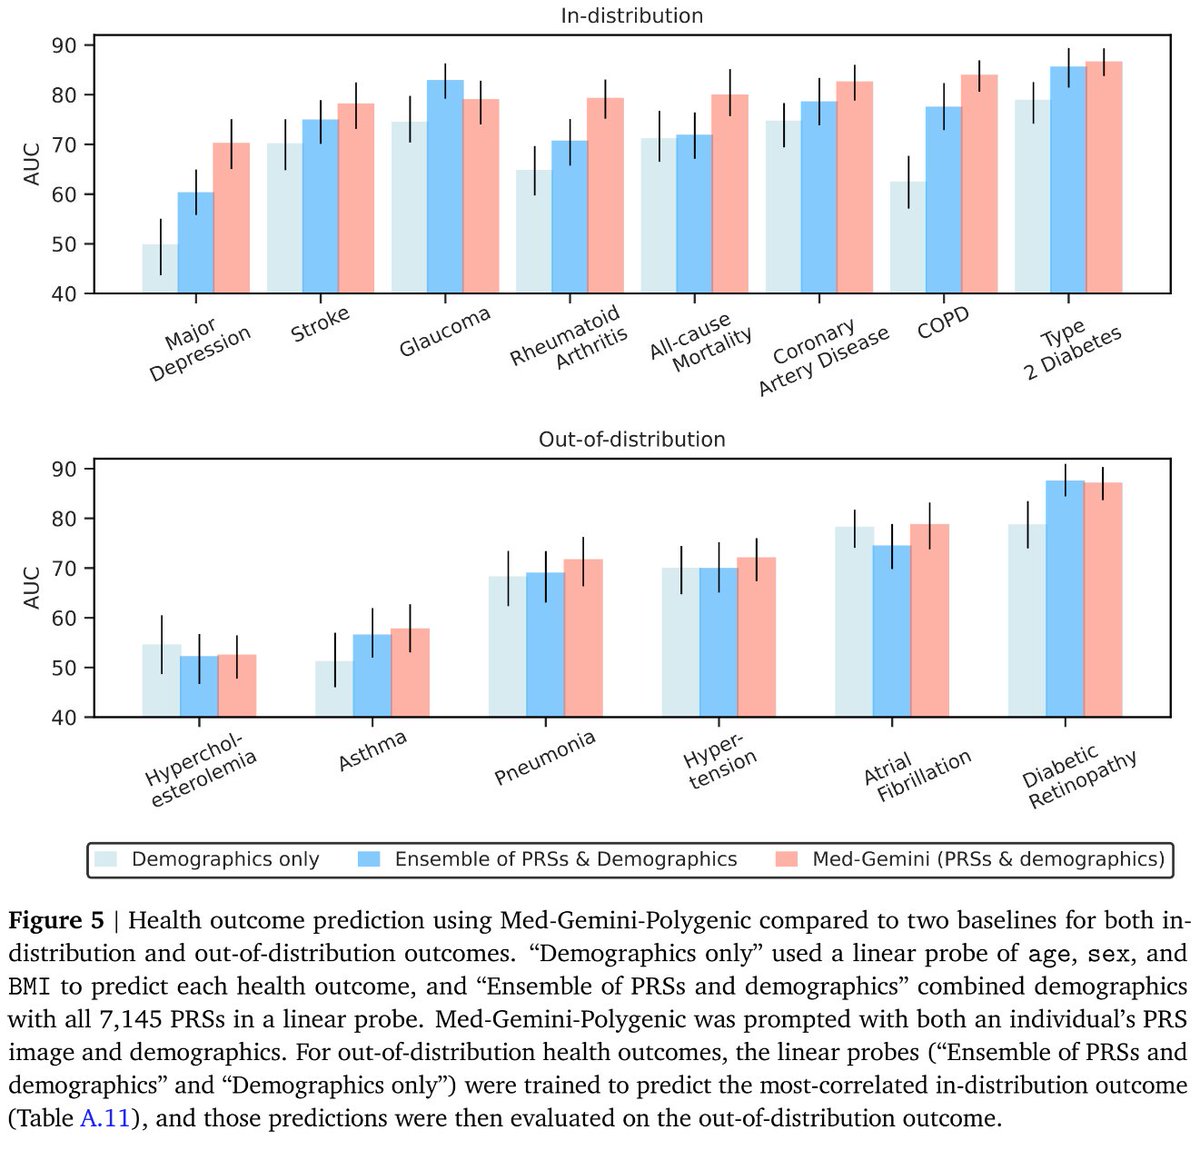 Med-Gemini-Polygenic is the first LMM to predict health outcomes from genomic data converted to polygenic risk scores. It beats PRS linear models, even surprisingly predicts outcomes it wasn't trained for.